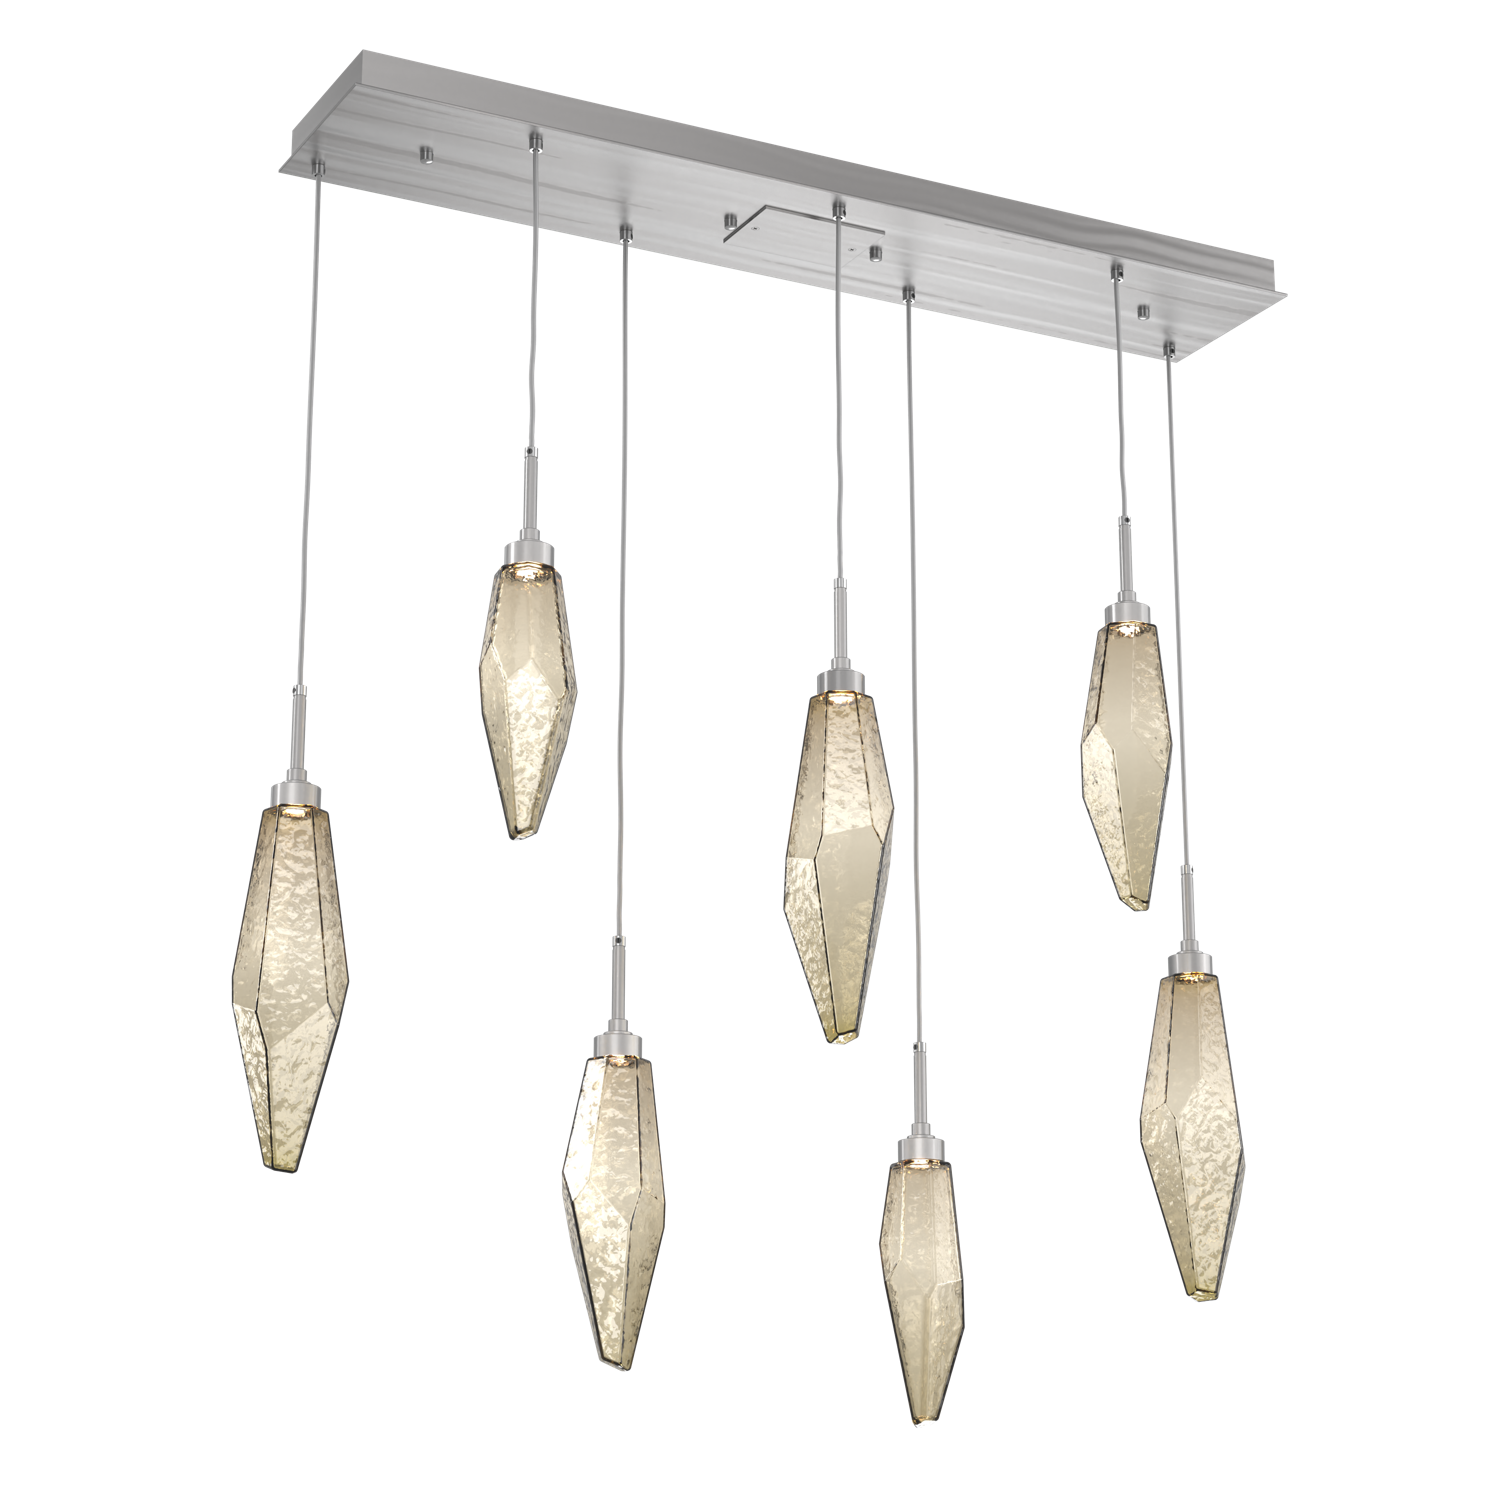 PLB0050-07-SN-CB-Hammerton-Studio-Rock-Crystal-7-light-linear-pendant-chandelier-with-satin-nickel-finish-and-chilled-bronze-blown-glass-shades-and-LED-lamping